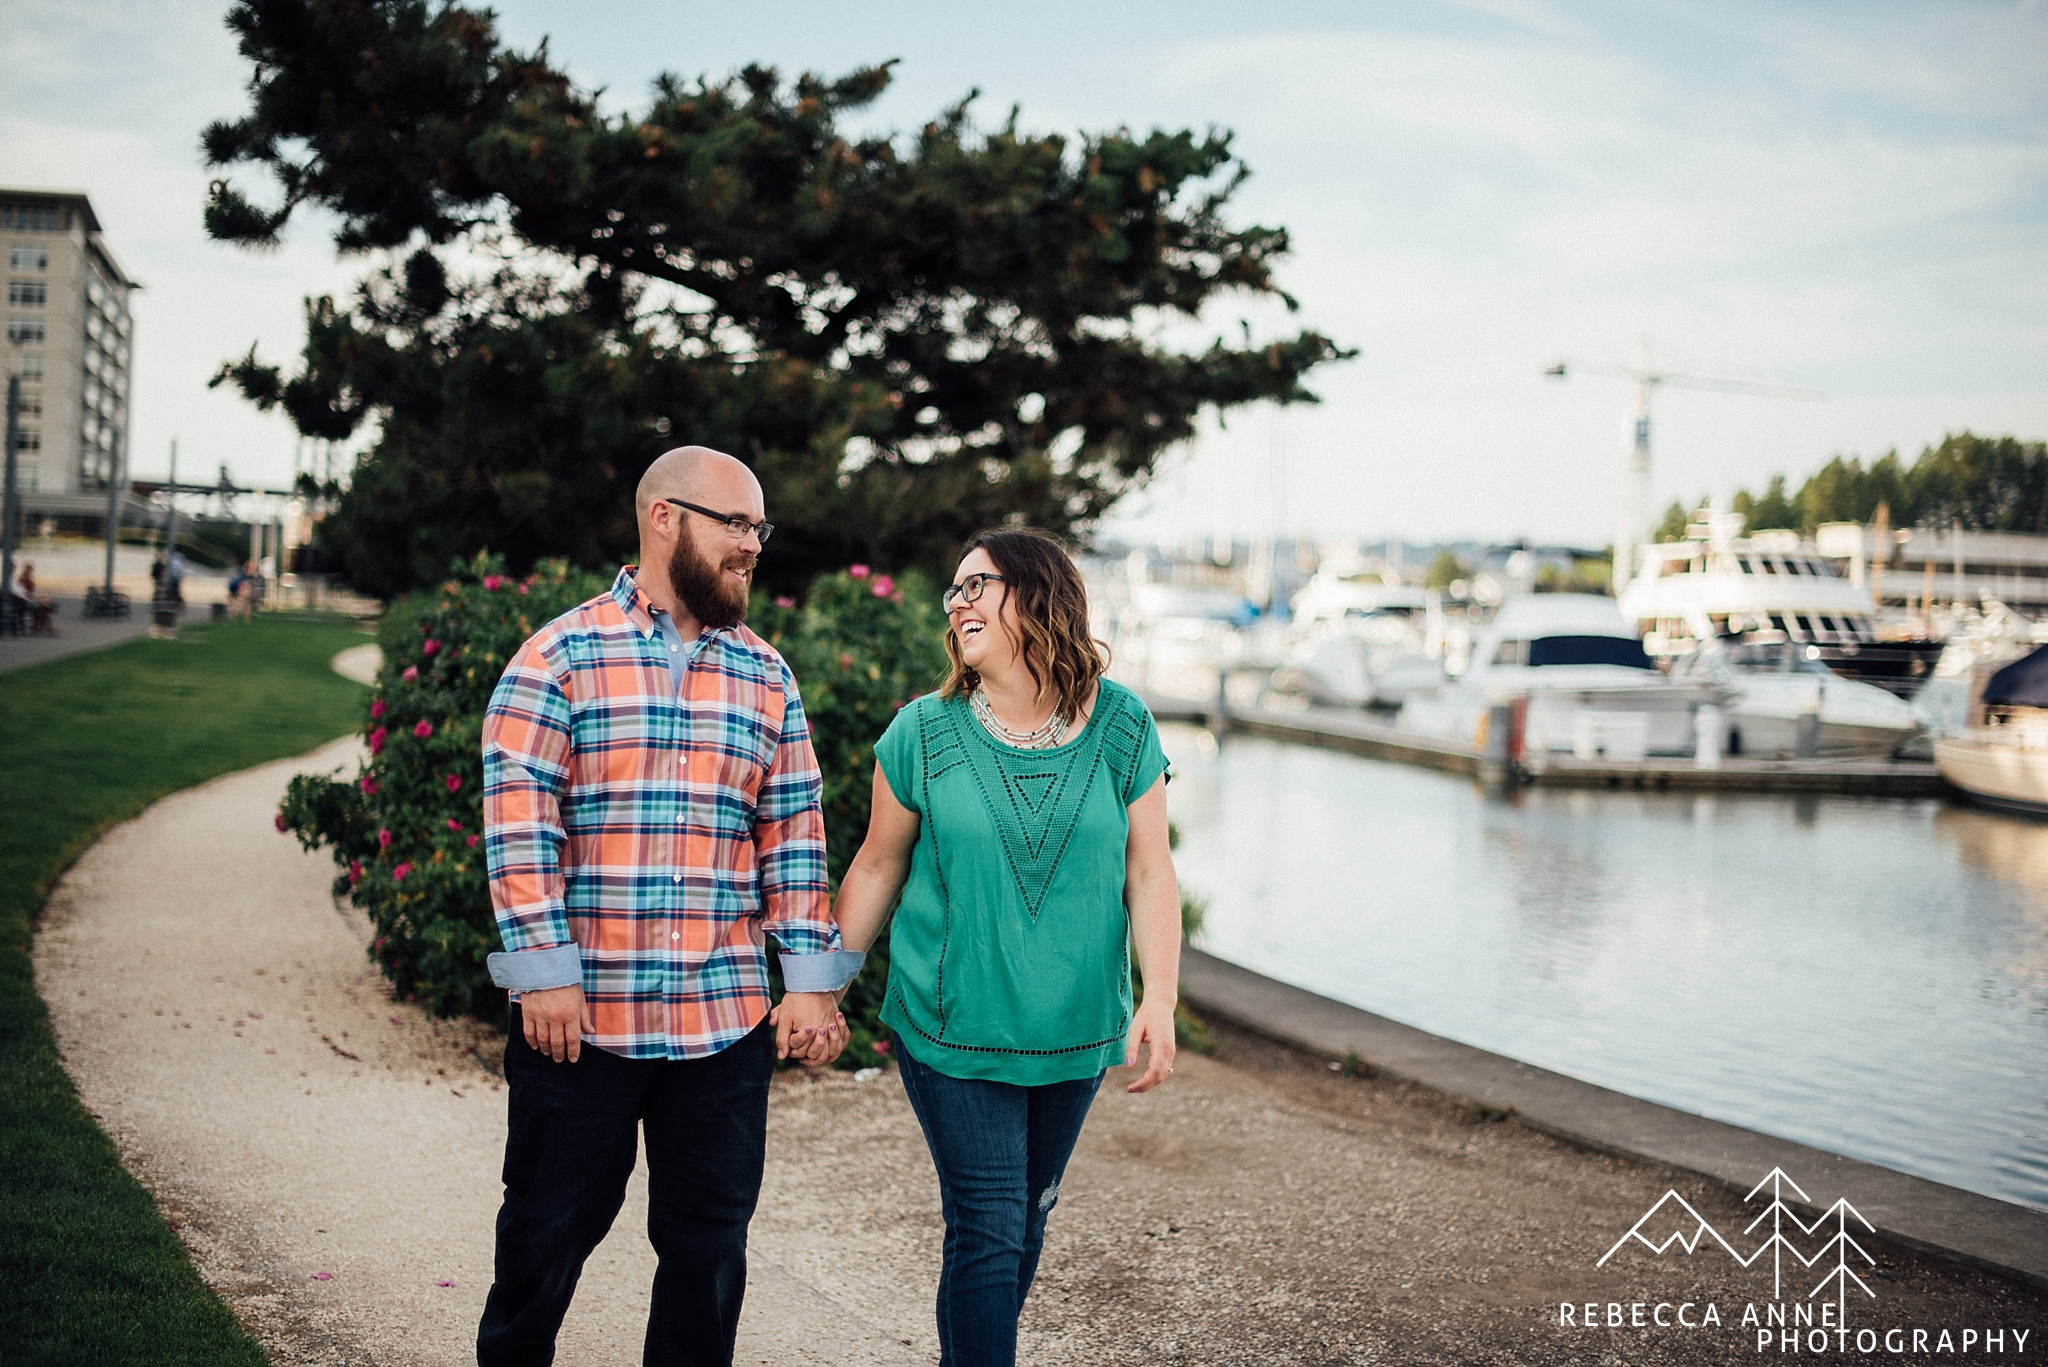 Downtown Tacoma Engagement,Downtown Tacoma Engagement Photographer,Downtown Tacoma Engagement Photos,Seattle Engagement Photographer,Washington Engagement Photographer,PNW Engagement Photographer,